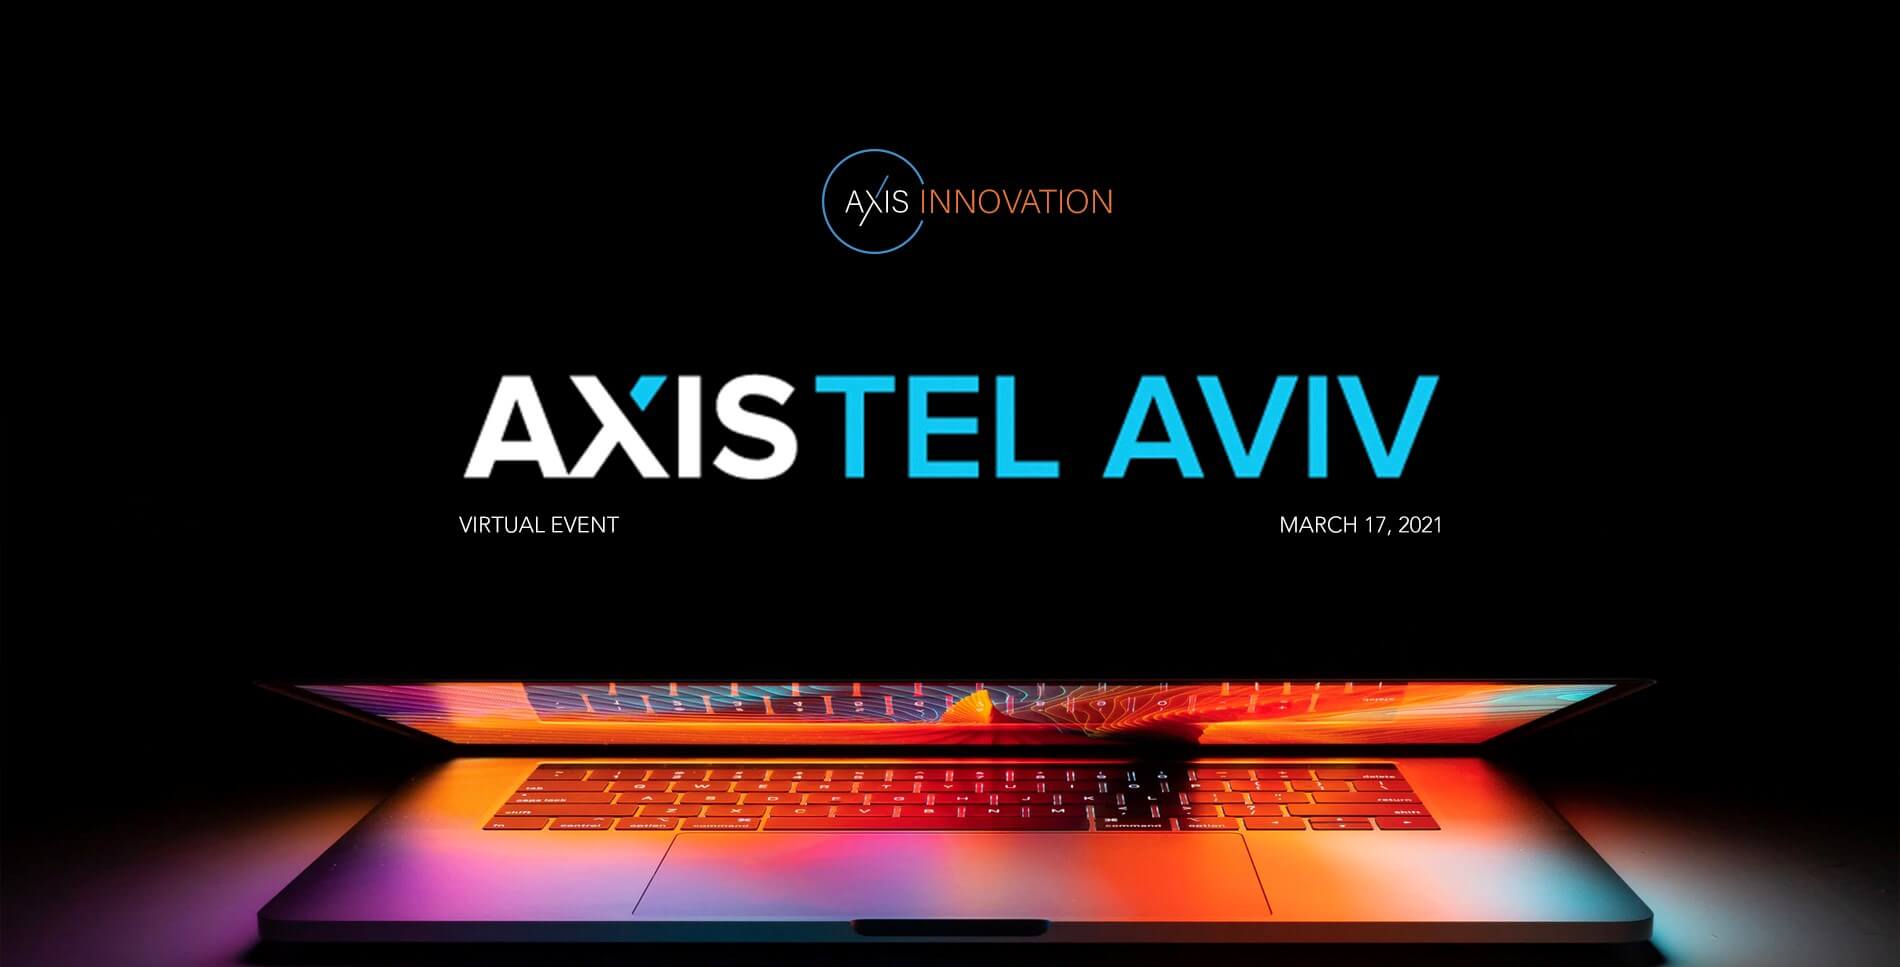 Tech Conferences in Israel